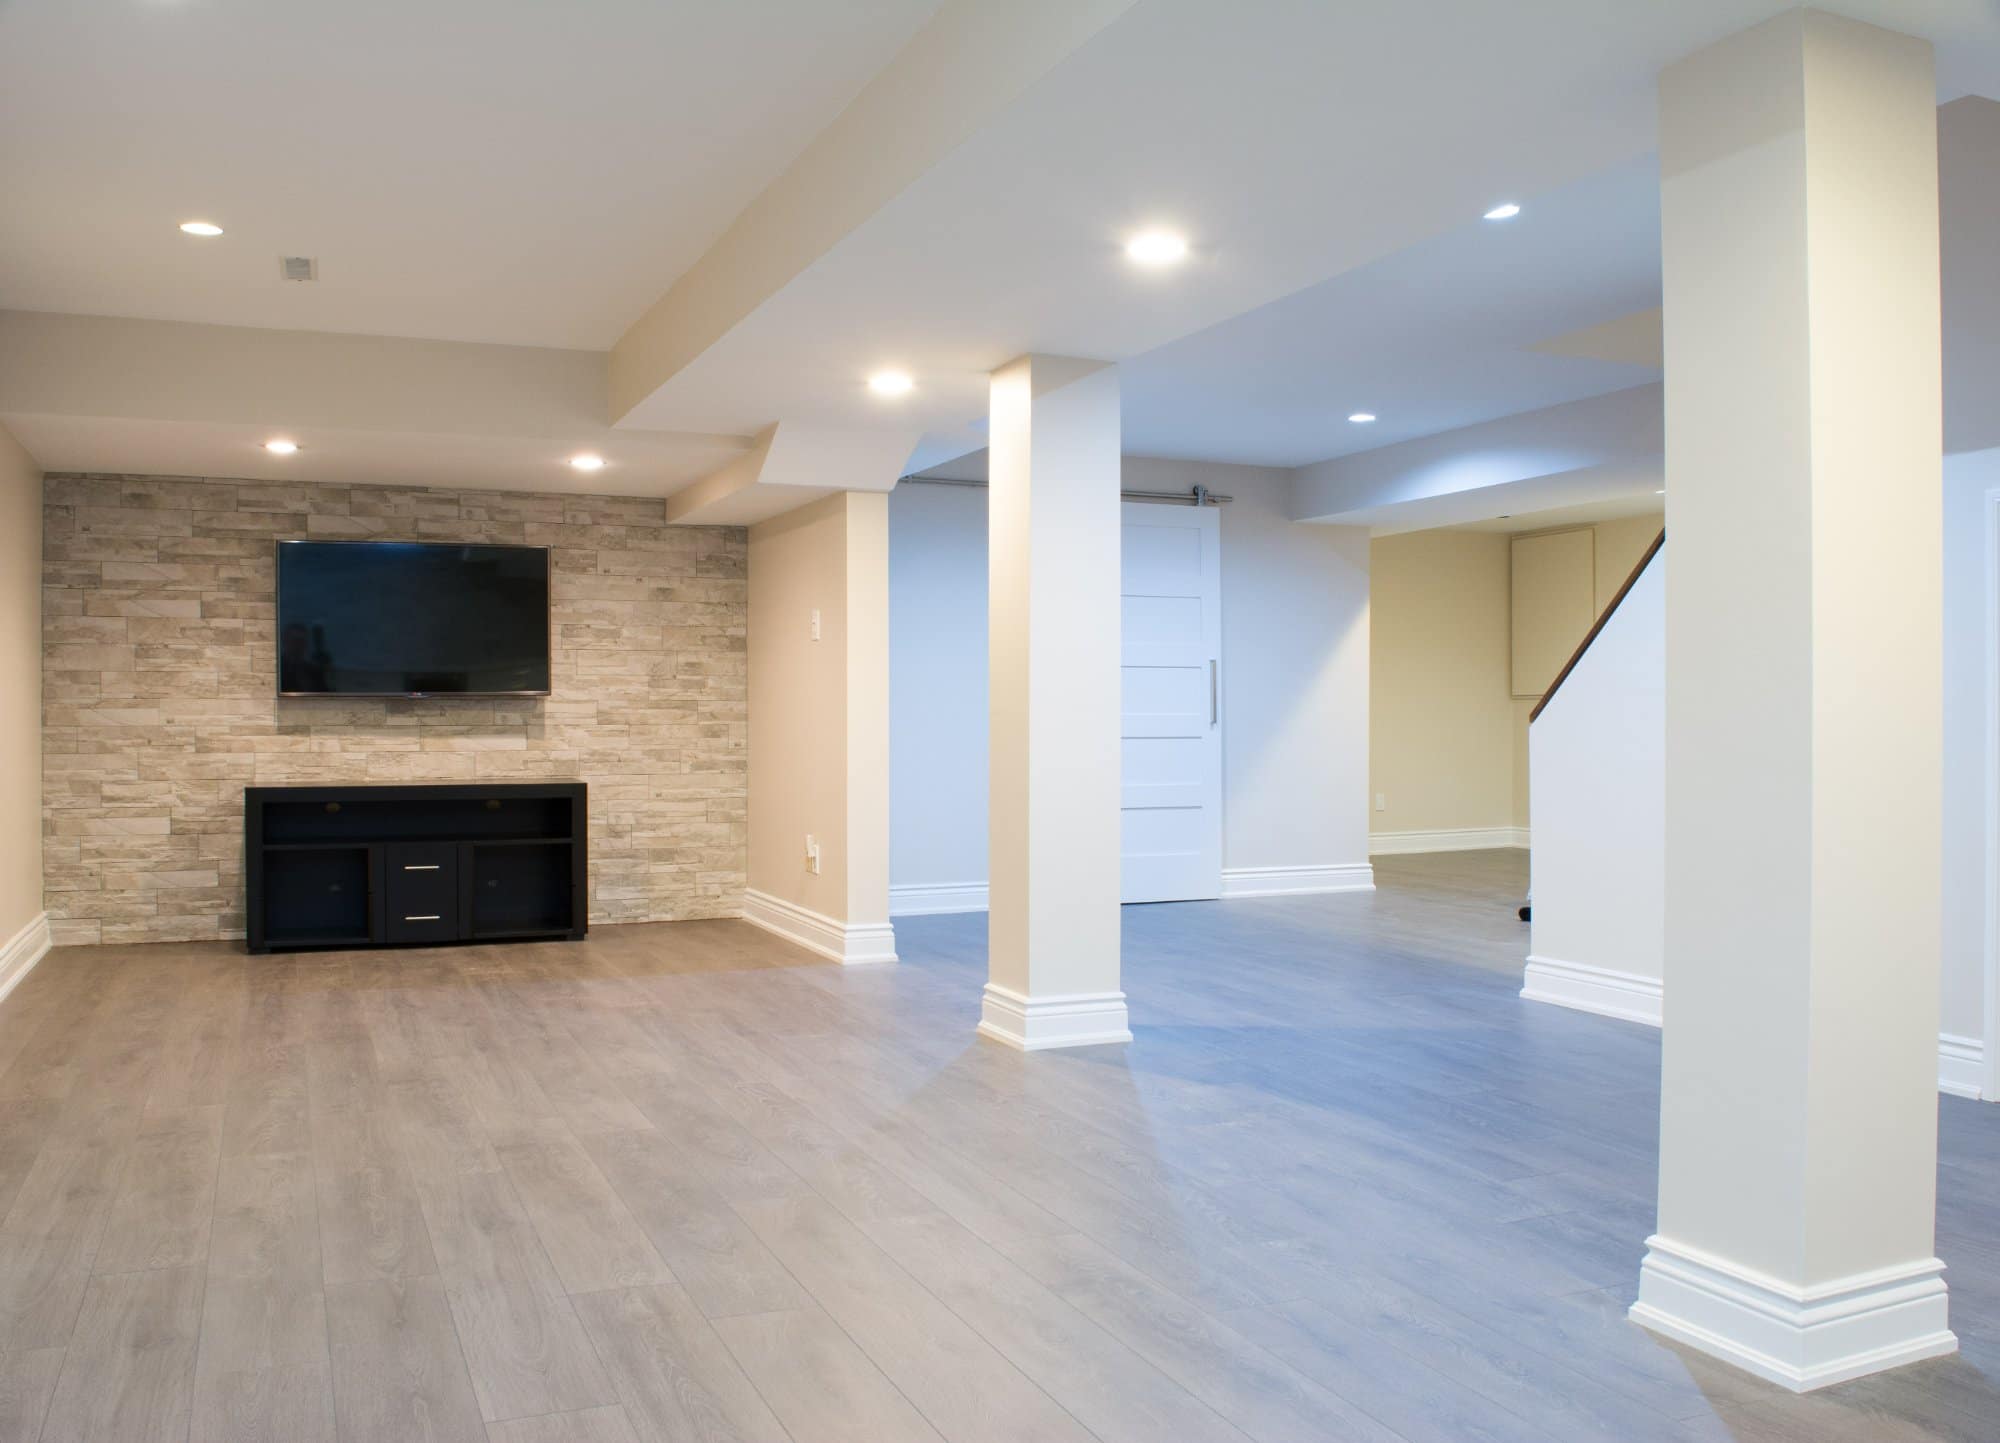 Quality Basement Development In Calgary Home Renovations By Aspire